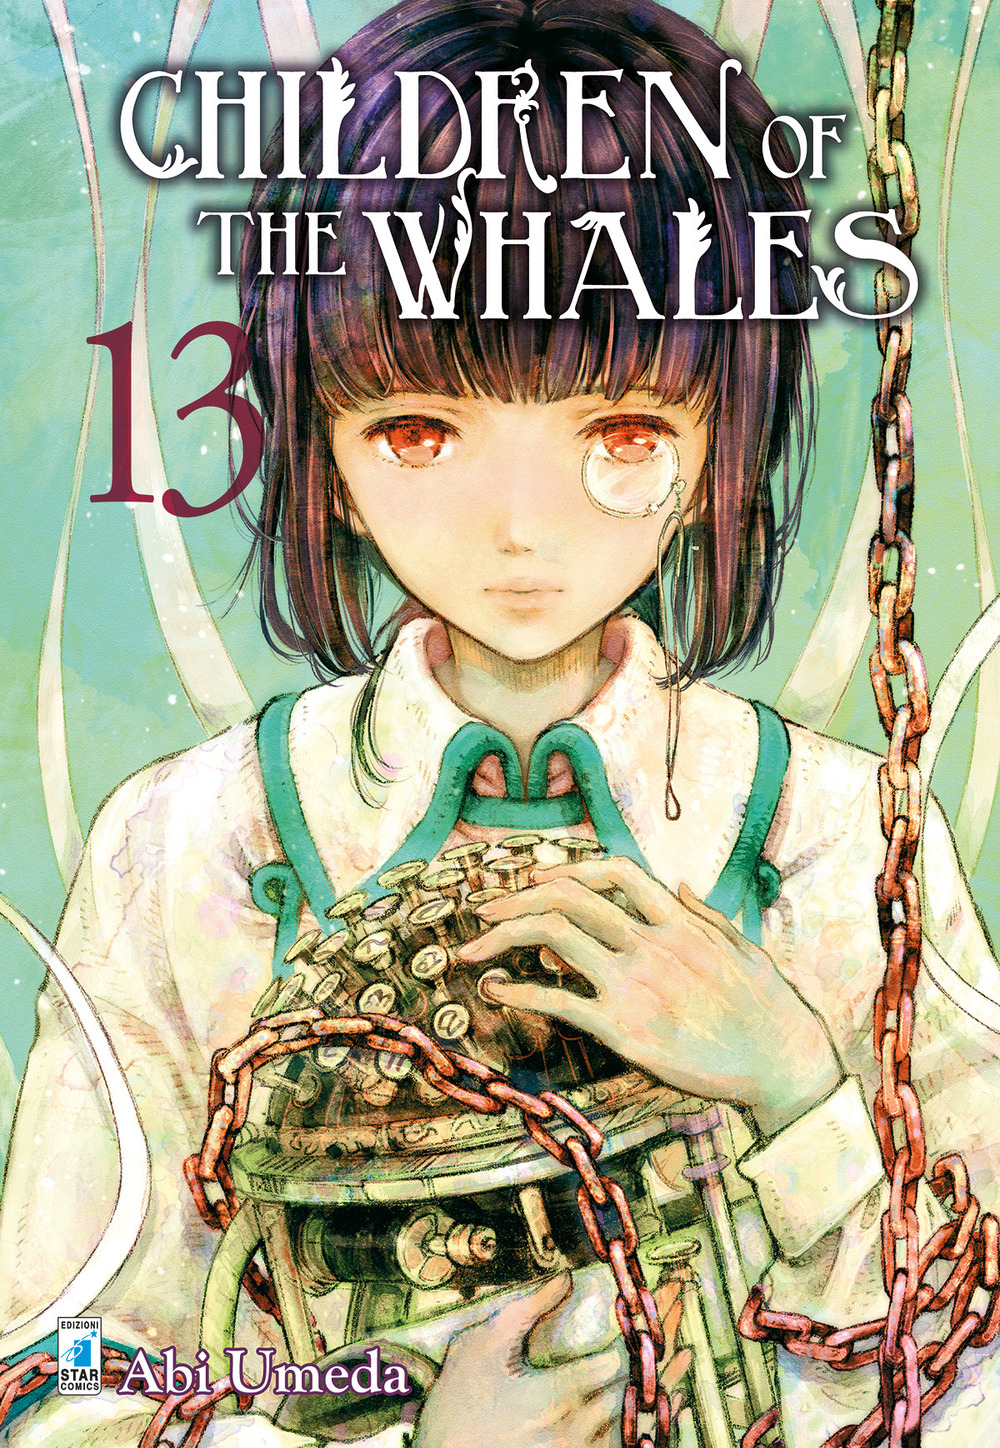 Children of the whales. Vol. 13